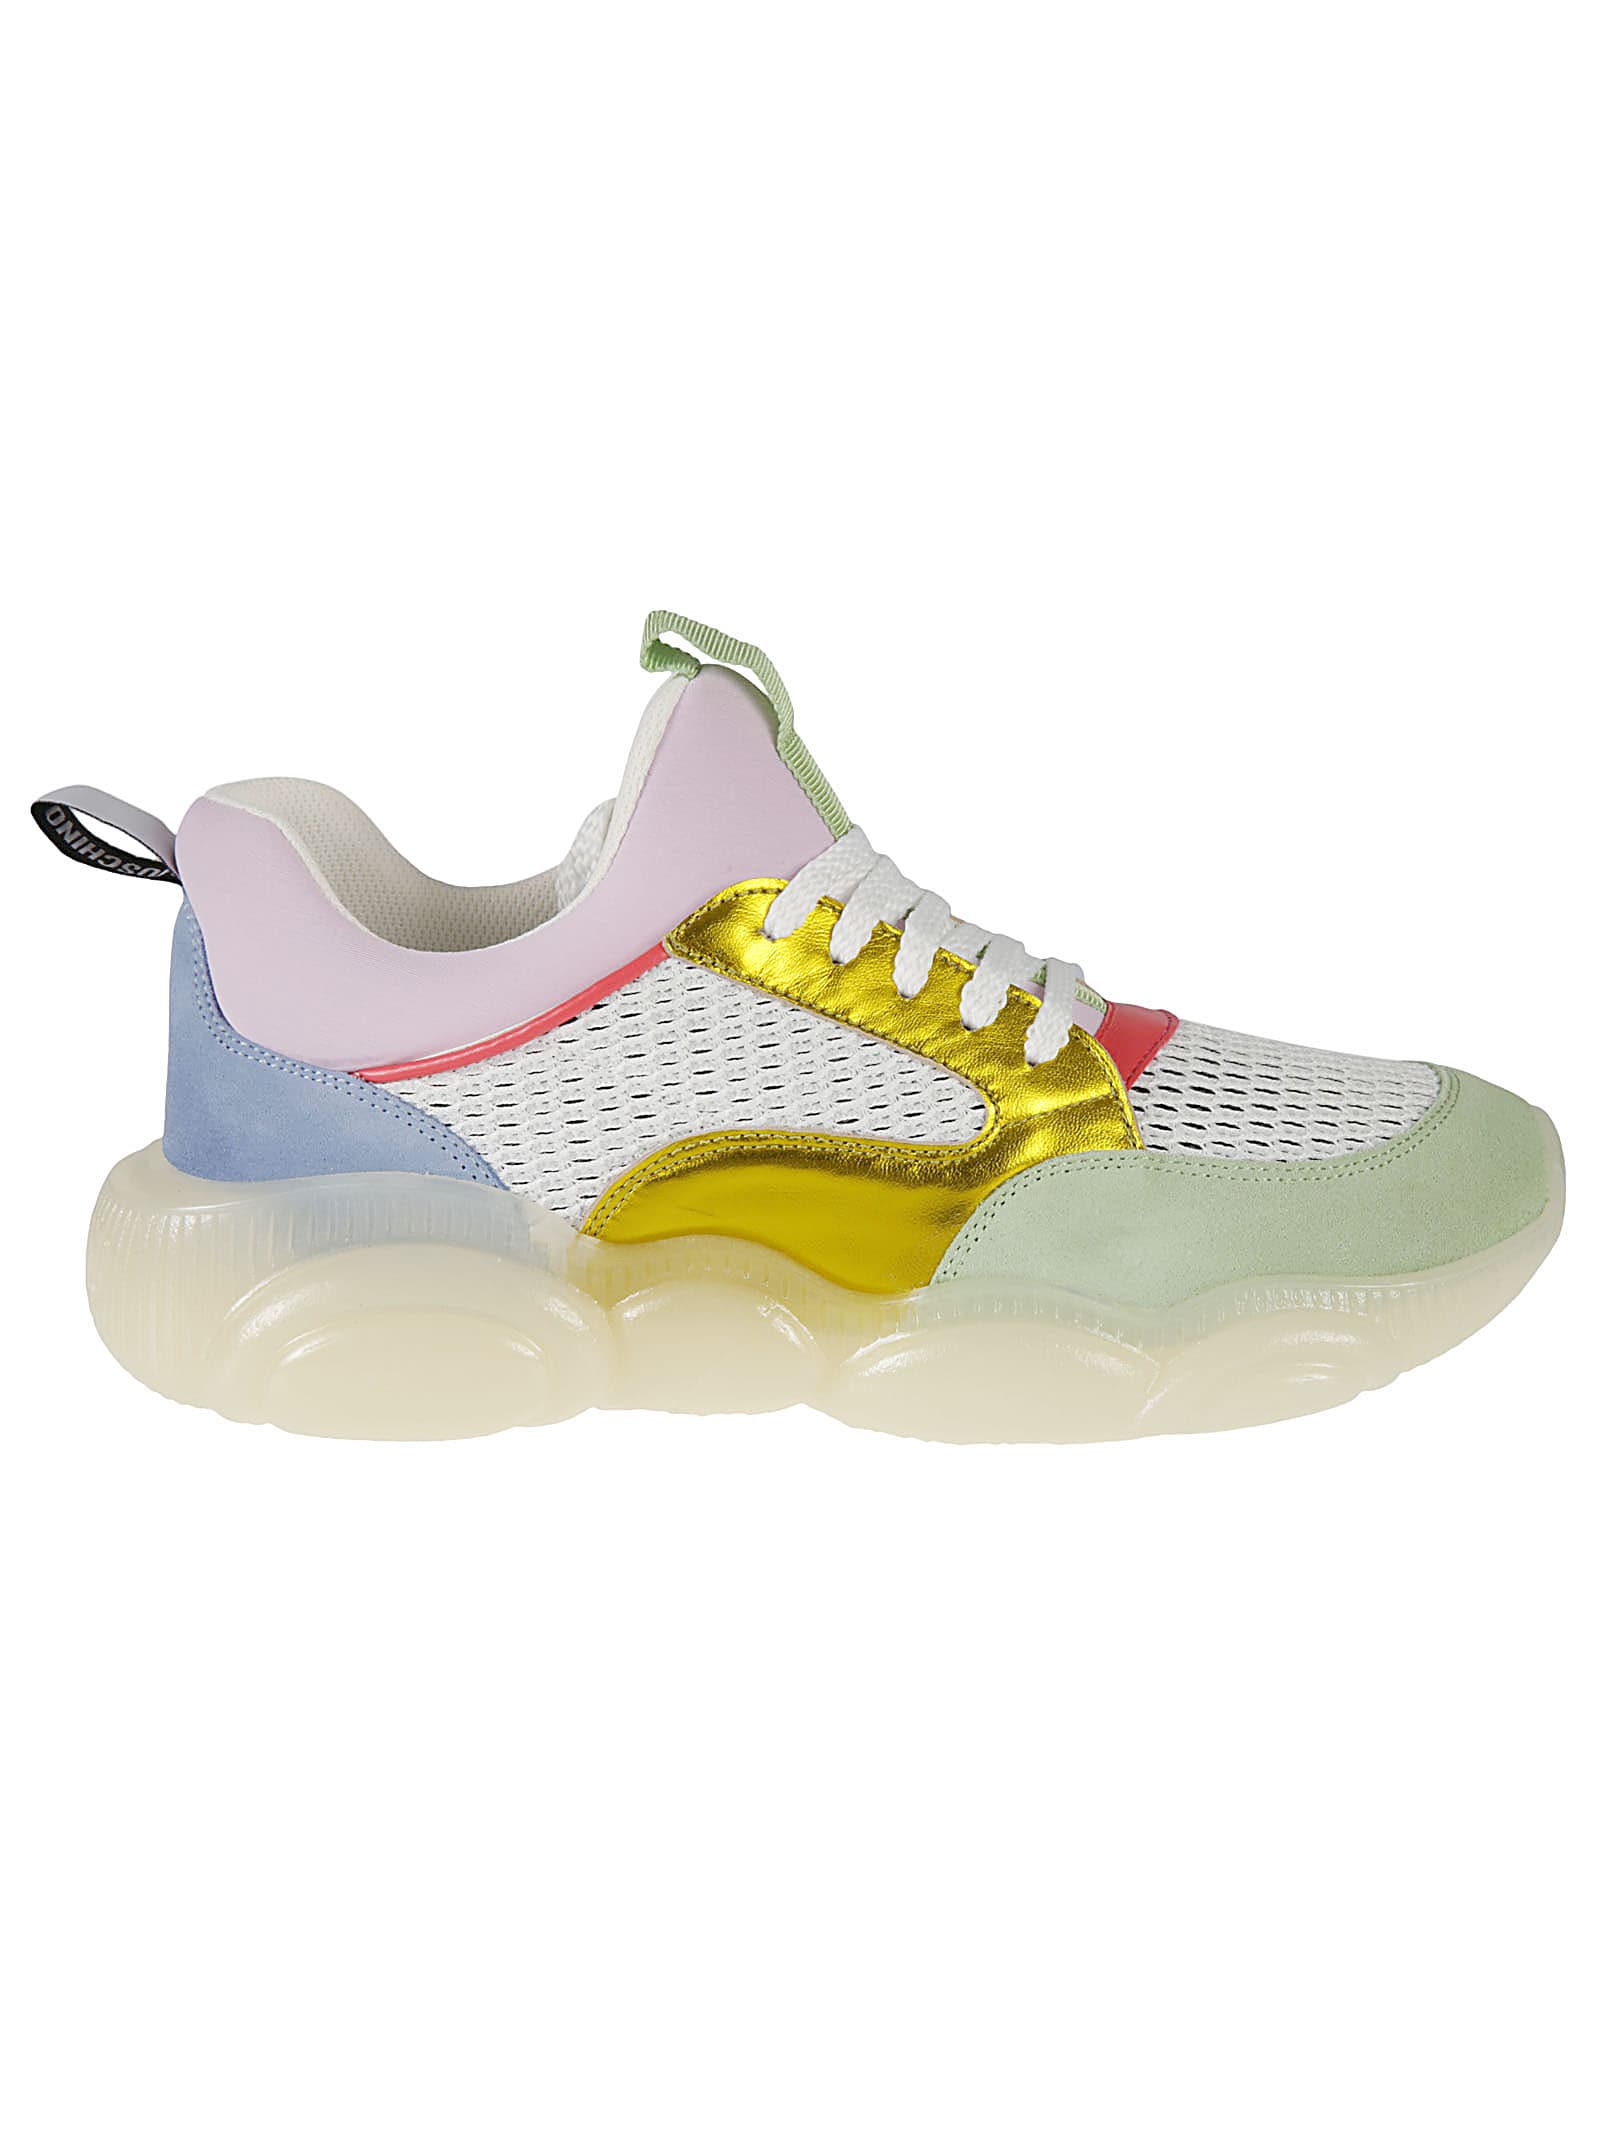 Buy Moschino Mesh Paneled Colourblock Sneakers online, shop Moschino shoes with free shipping